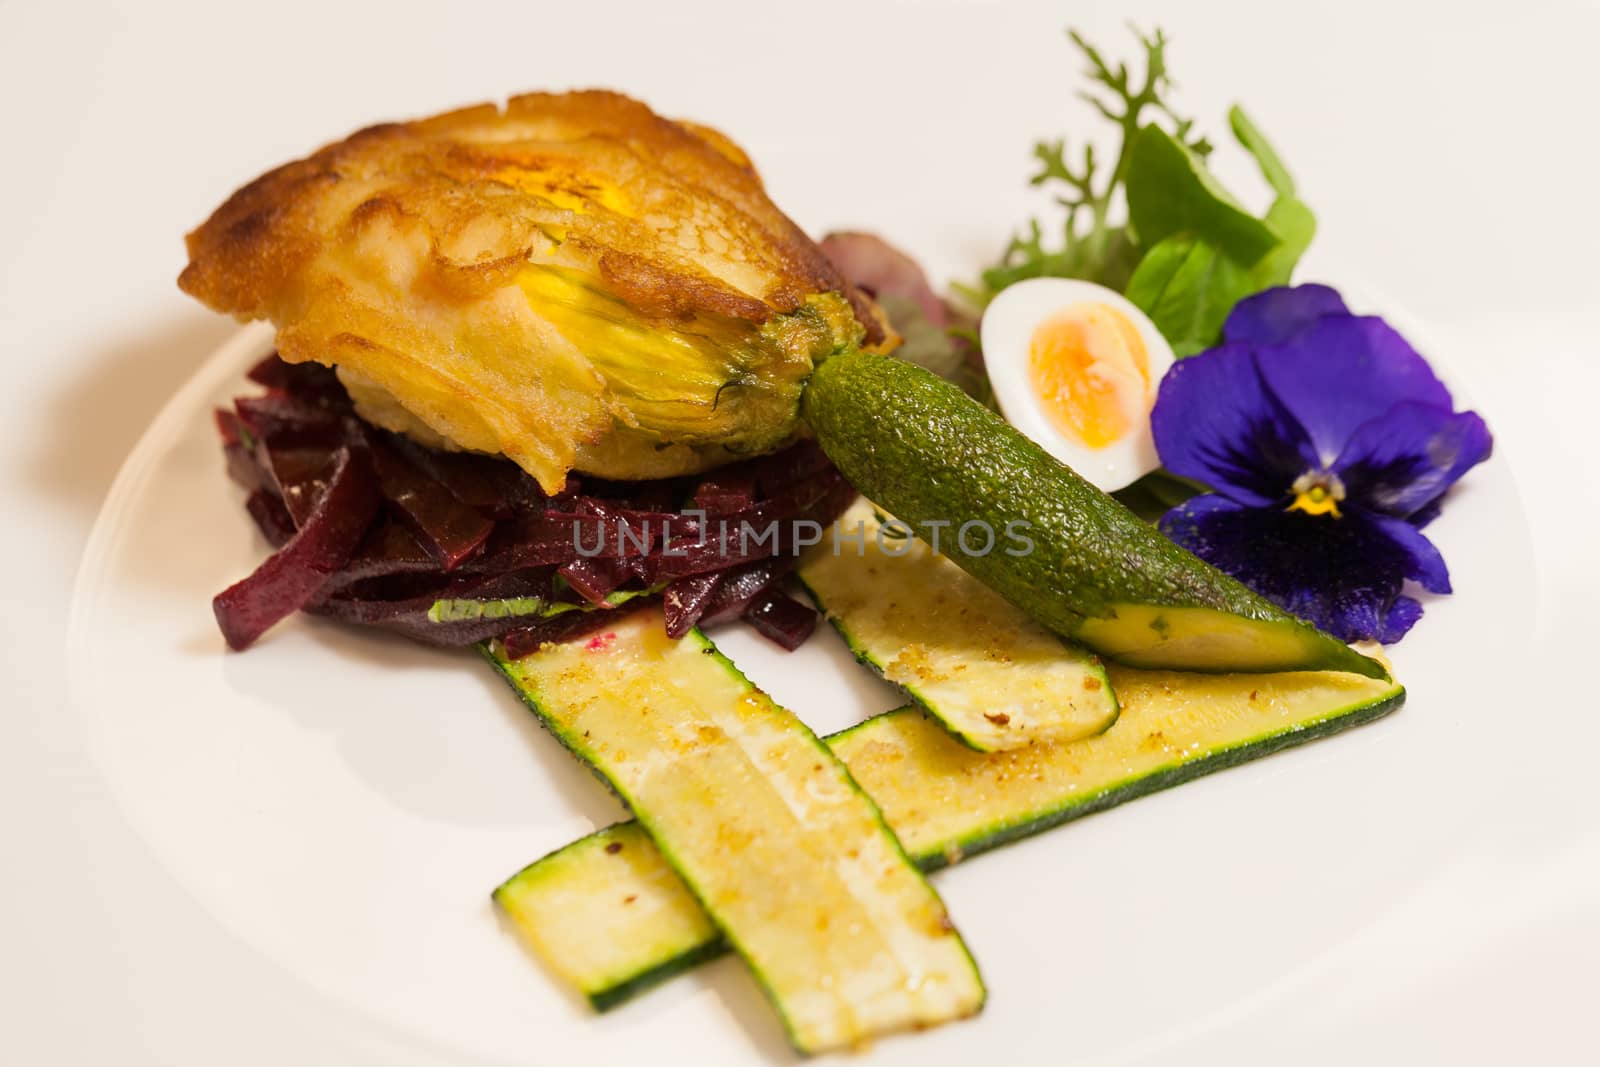 Delicious gourmet plate featuring biscuit sandwich with beets, zucchini strips and pansy garnish over white background